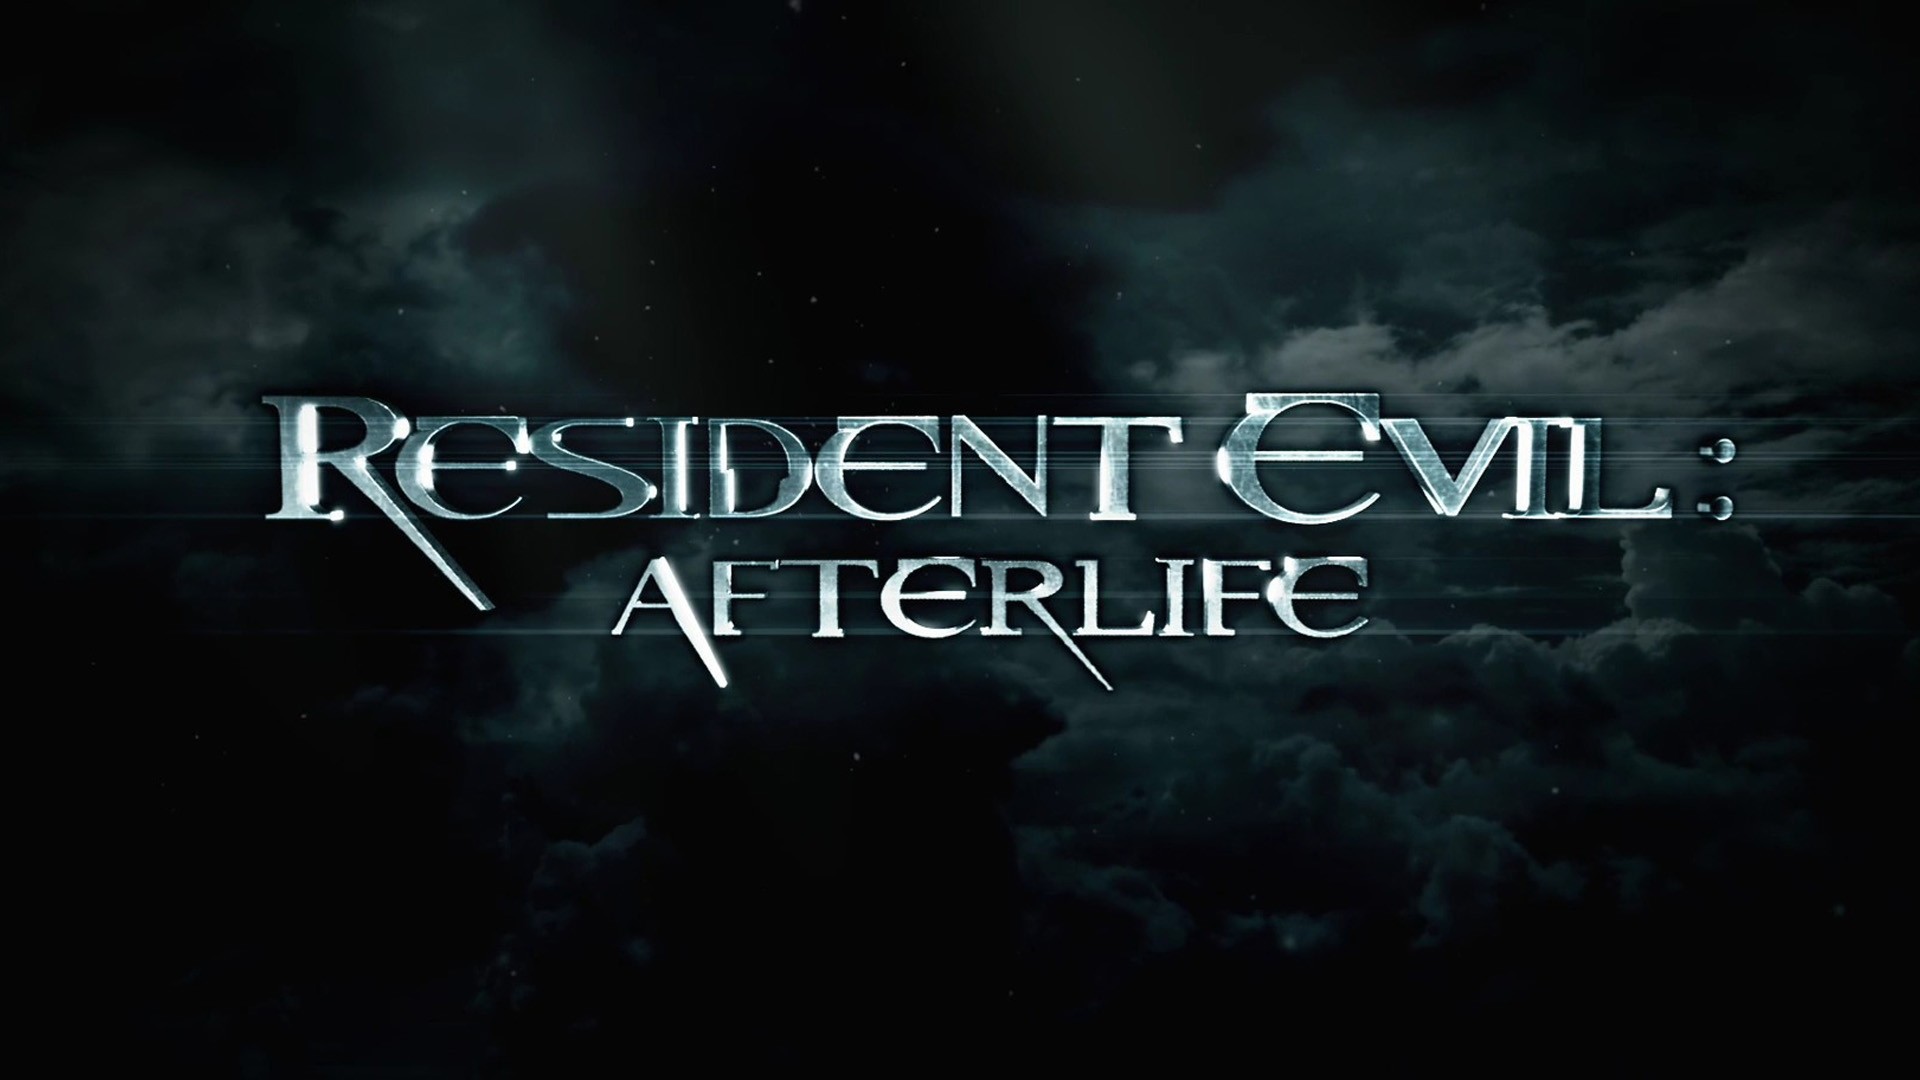 Wallpaper Resident evil, Afterlife, Movie, Photo, Game HD, Picture, Image